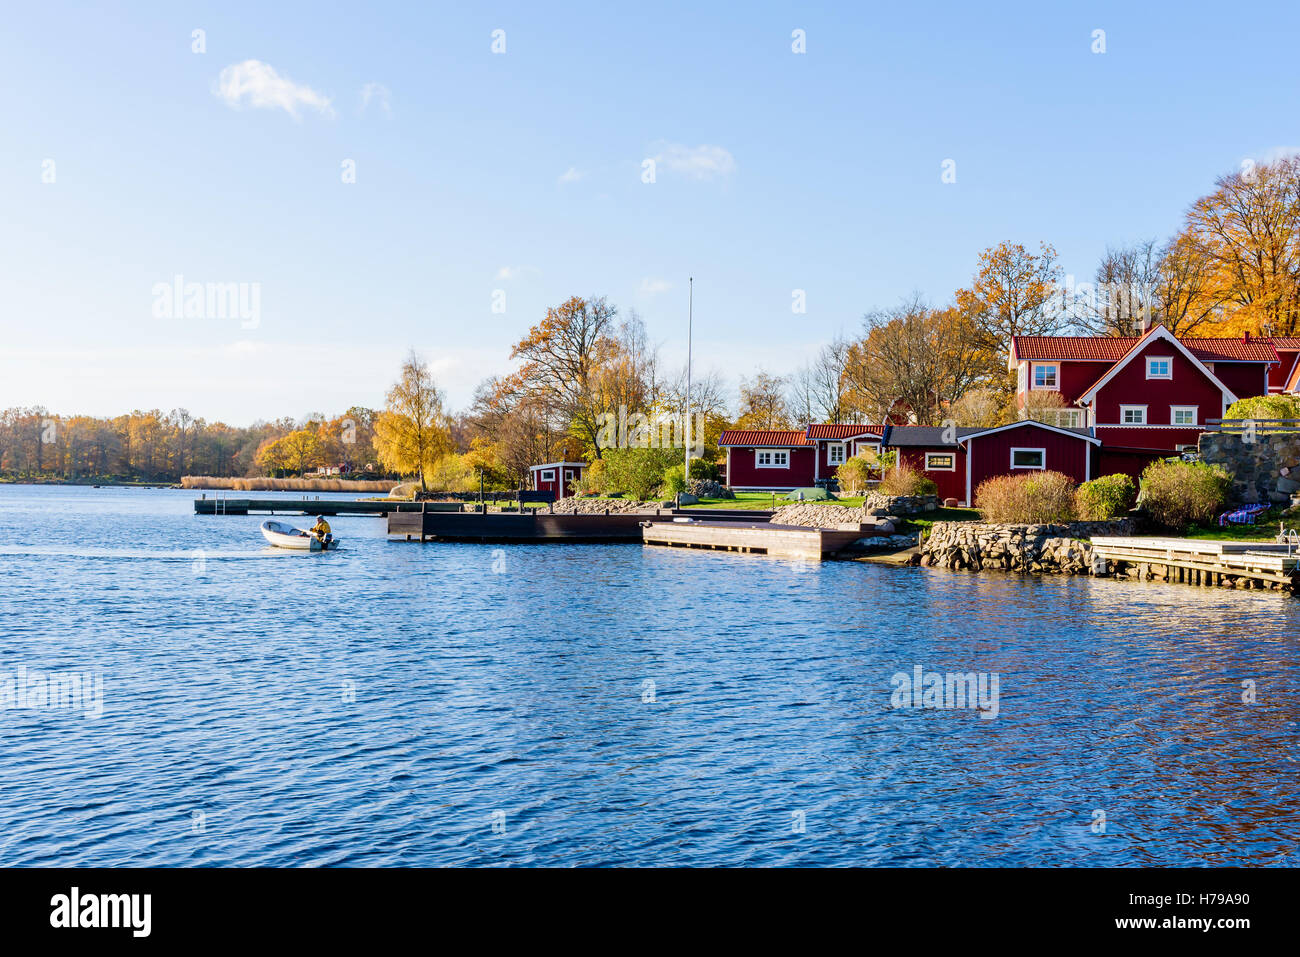 Bokevik, Sweden - October 29, 2016: Environmental documentary of coastal lifestyle. Man in small motorboat just outside the priv Stock Photo